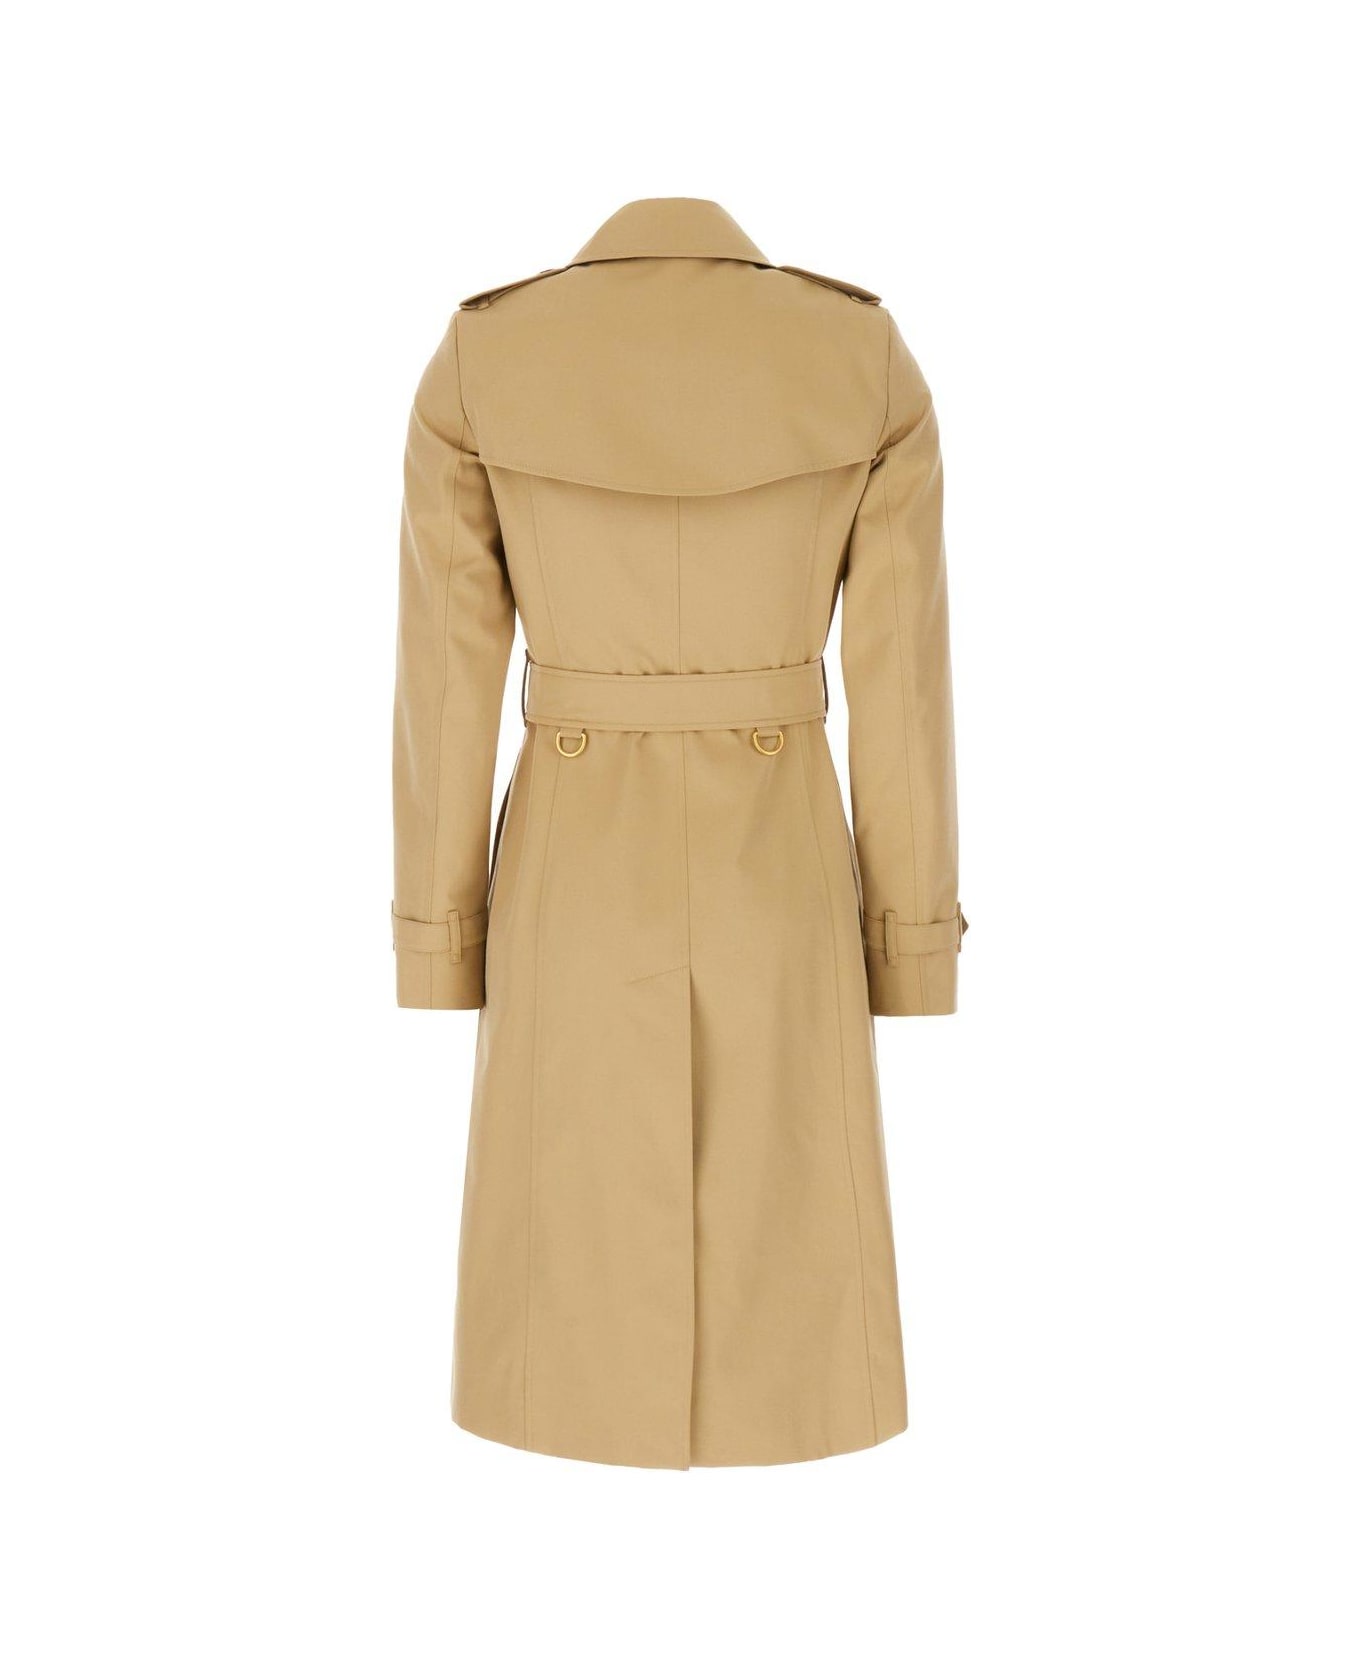 Burberry Double Breasted Belted Trench Coat - A1366